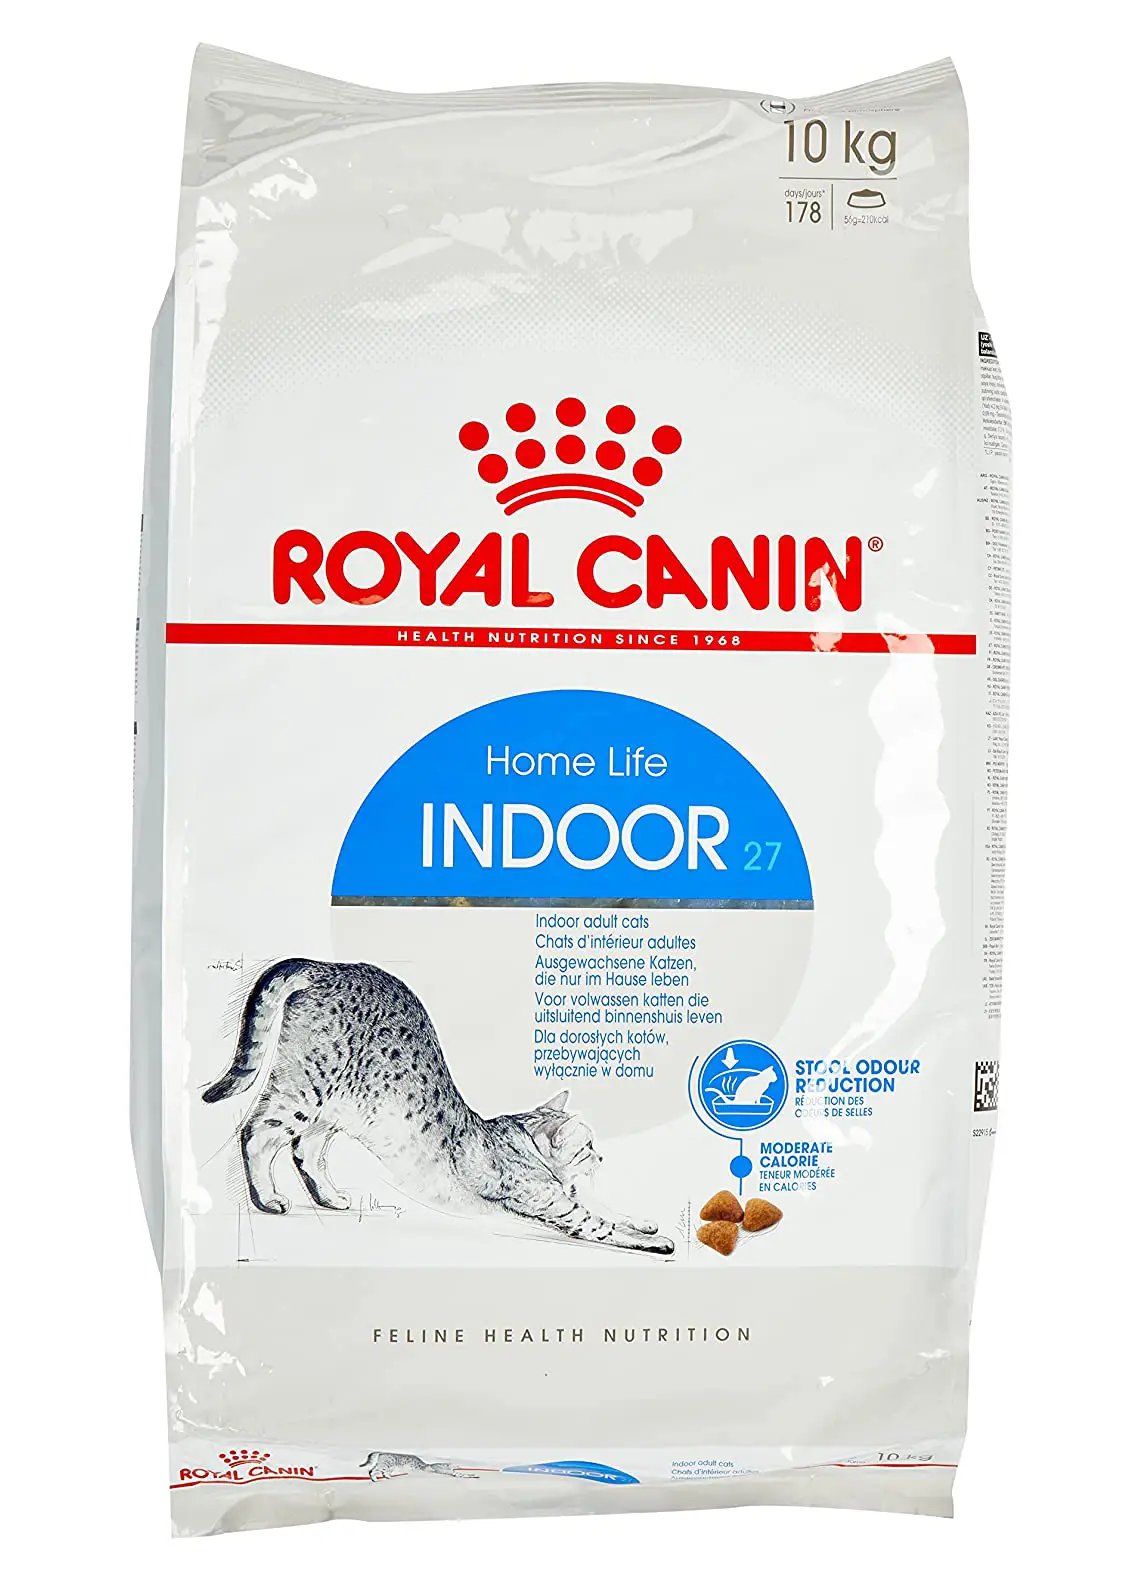 thuc-an-hat-cho-meo-royal-canin-indoor-10kg-2.webp